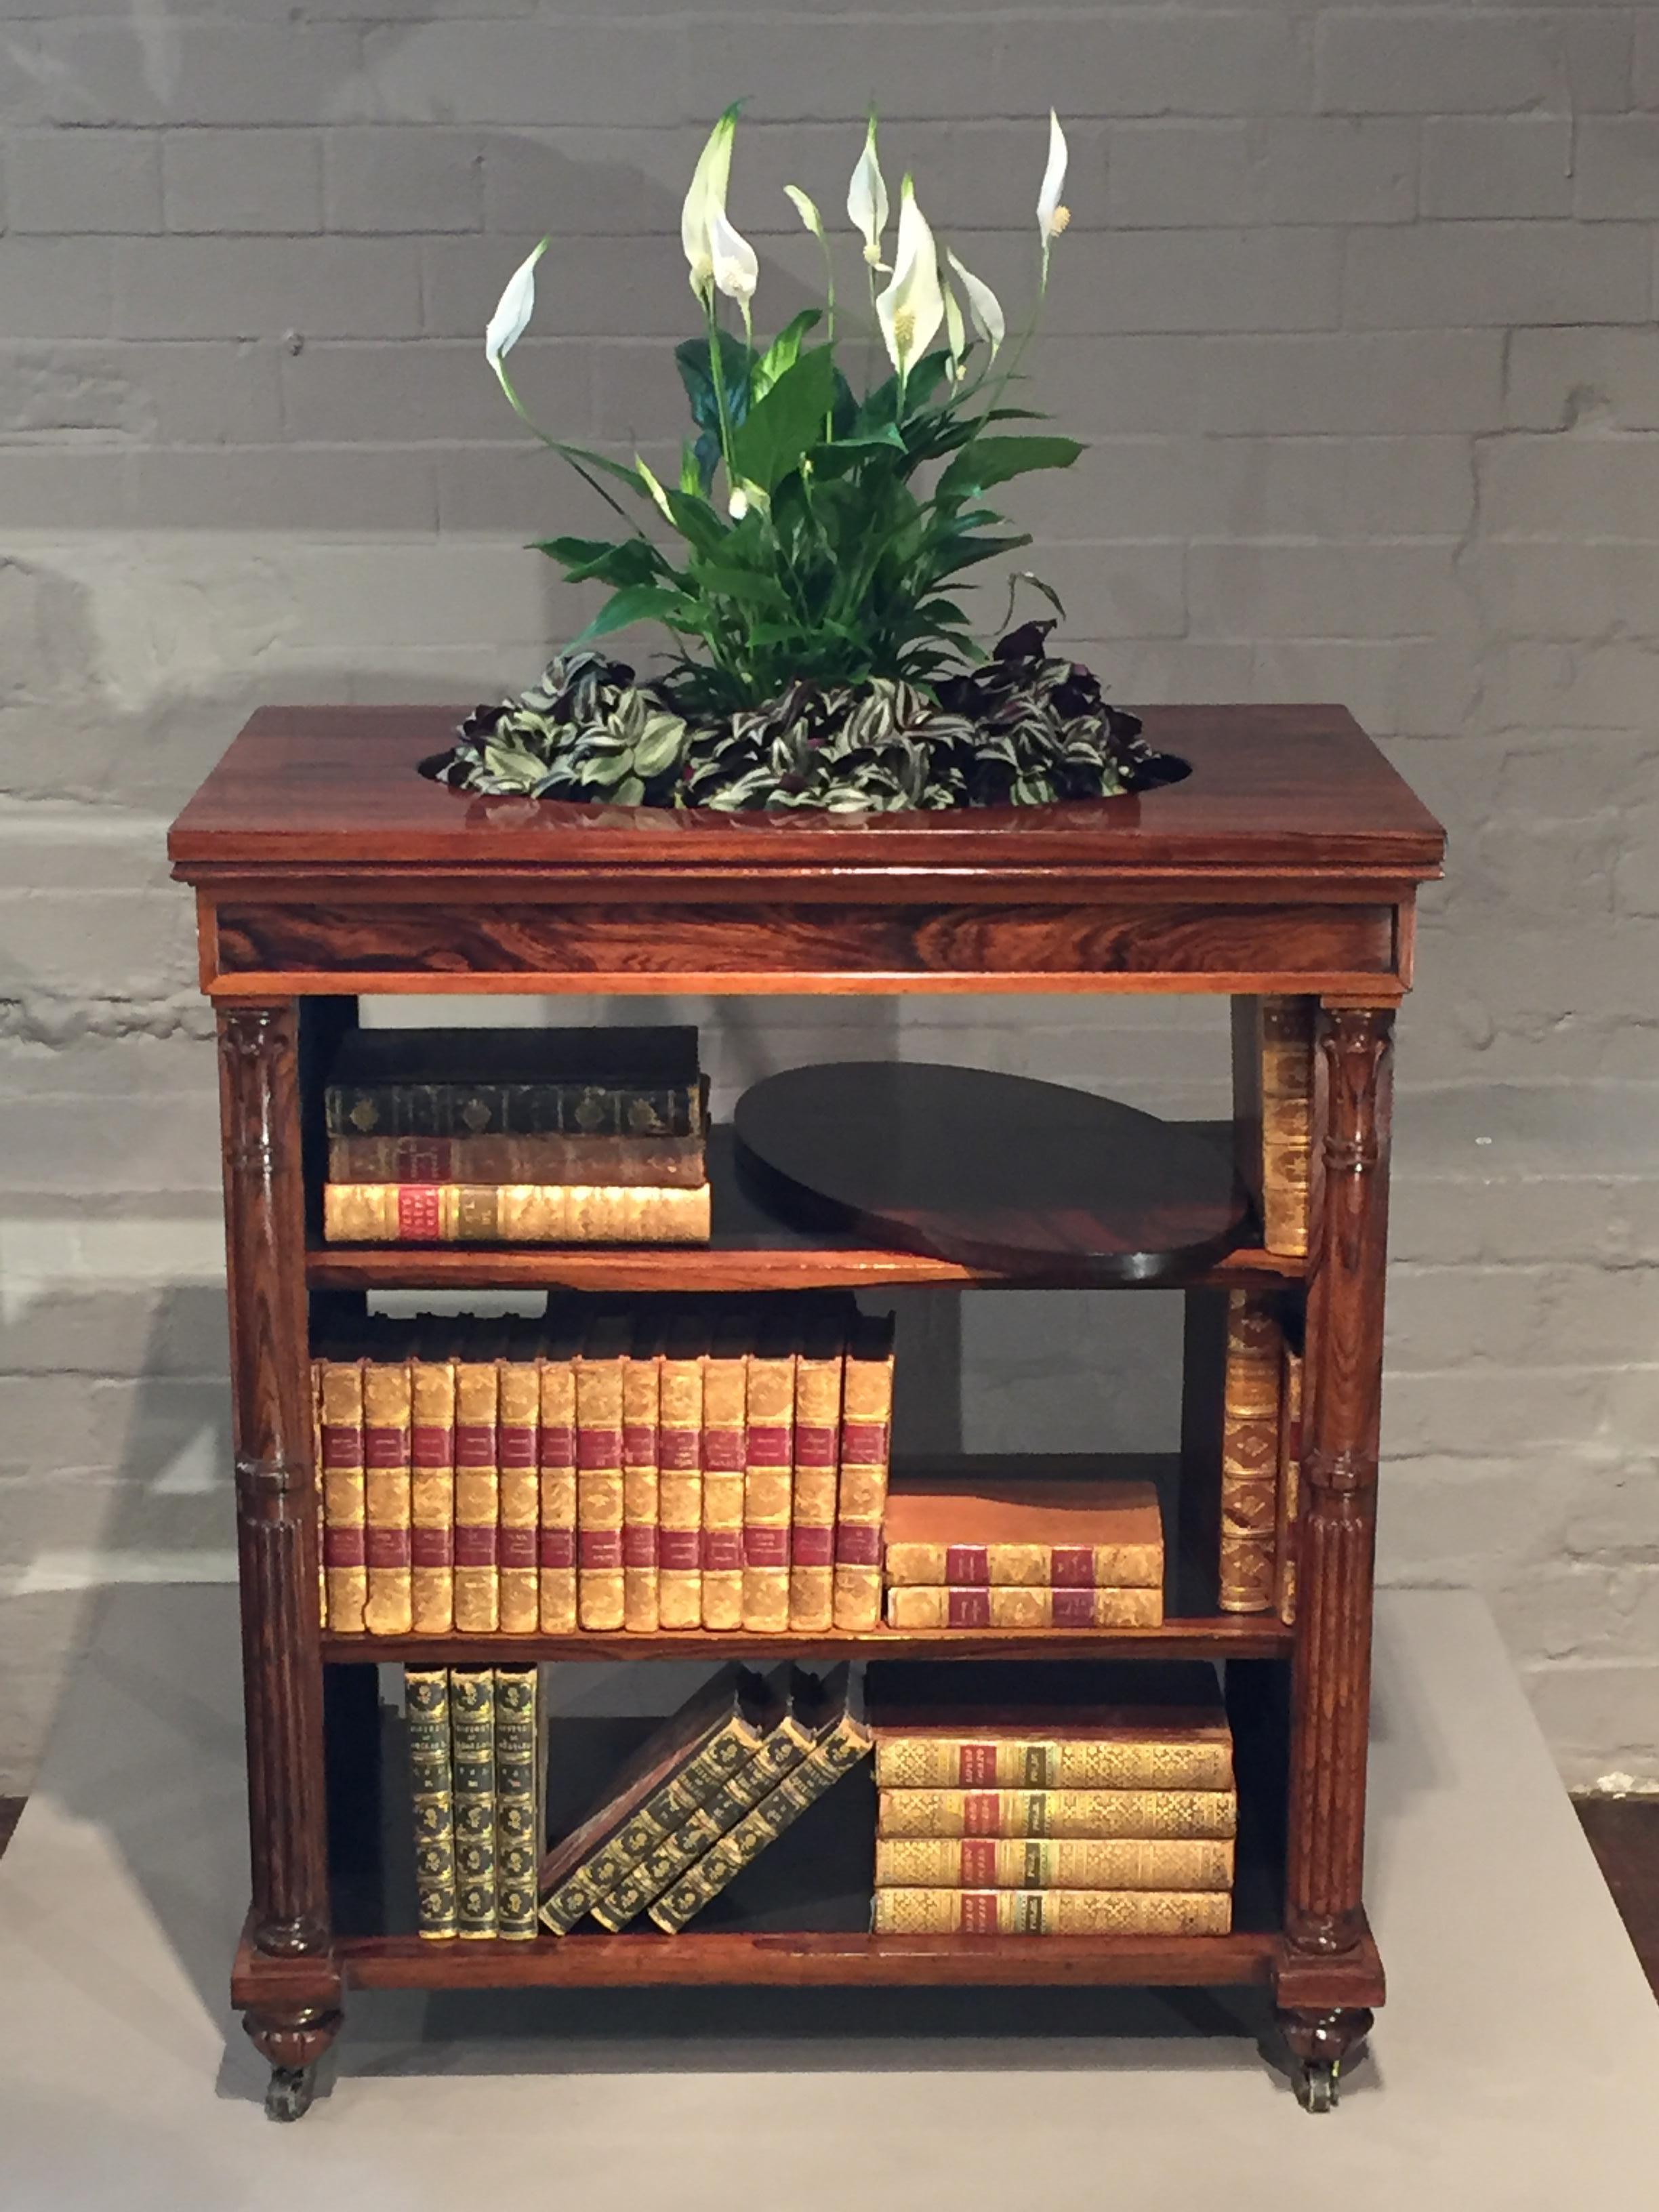 A charming, attractive and useful Regency period centre open bookcase jardinière.
The cabinet of finely figured rosewood with pleated silk panel ends, split classical column corners and a removable oval lid to the jardinière, on castors.
A most